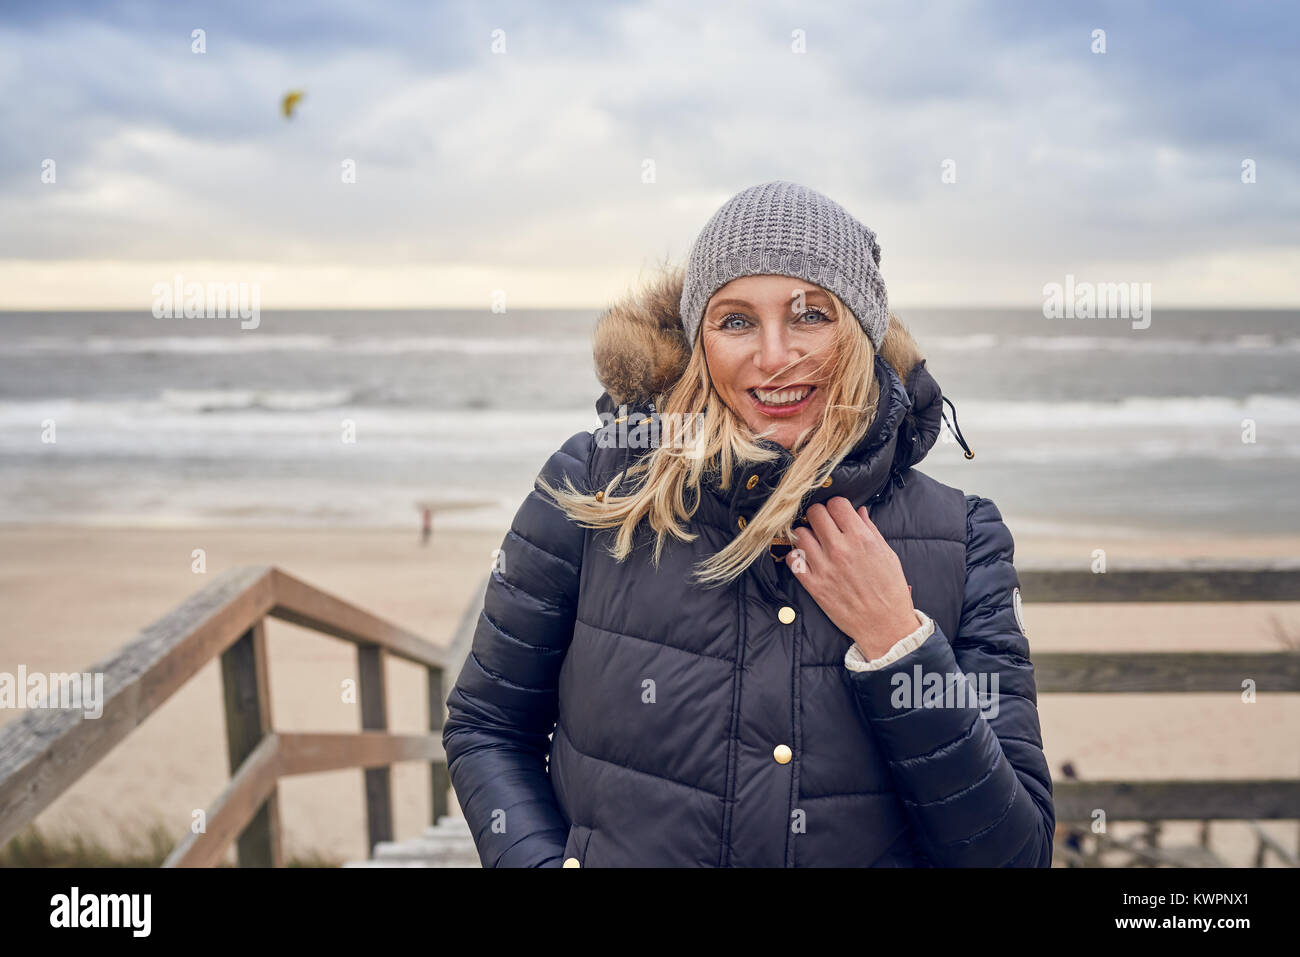 Middle-aged woman braving a cold winter day at the seaside standing on a wooden deck overlooking the beach on a breezy day smiling happily at the came Stock Photo